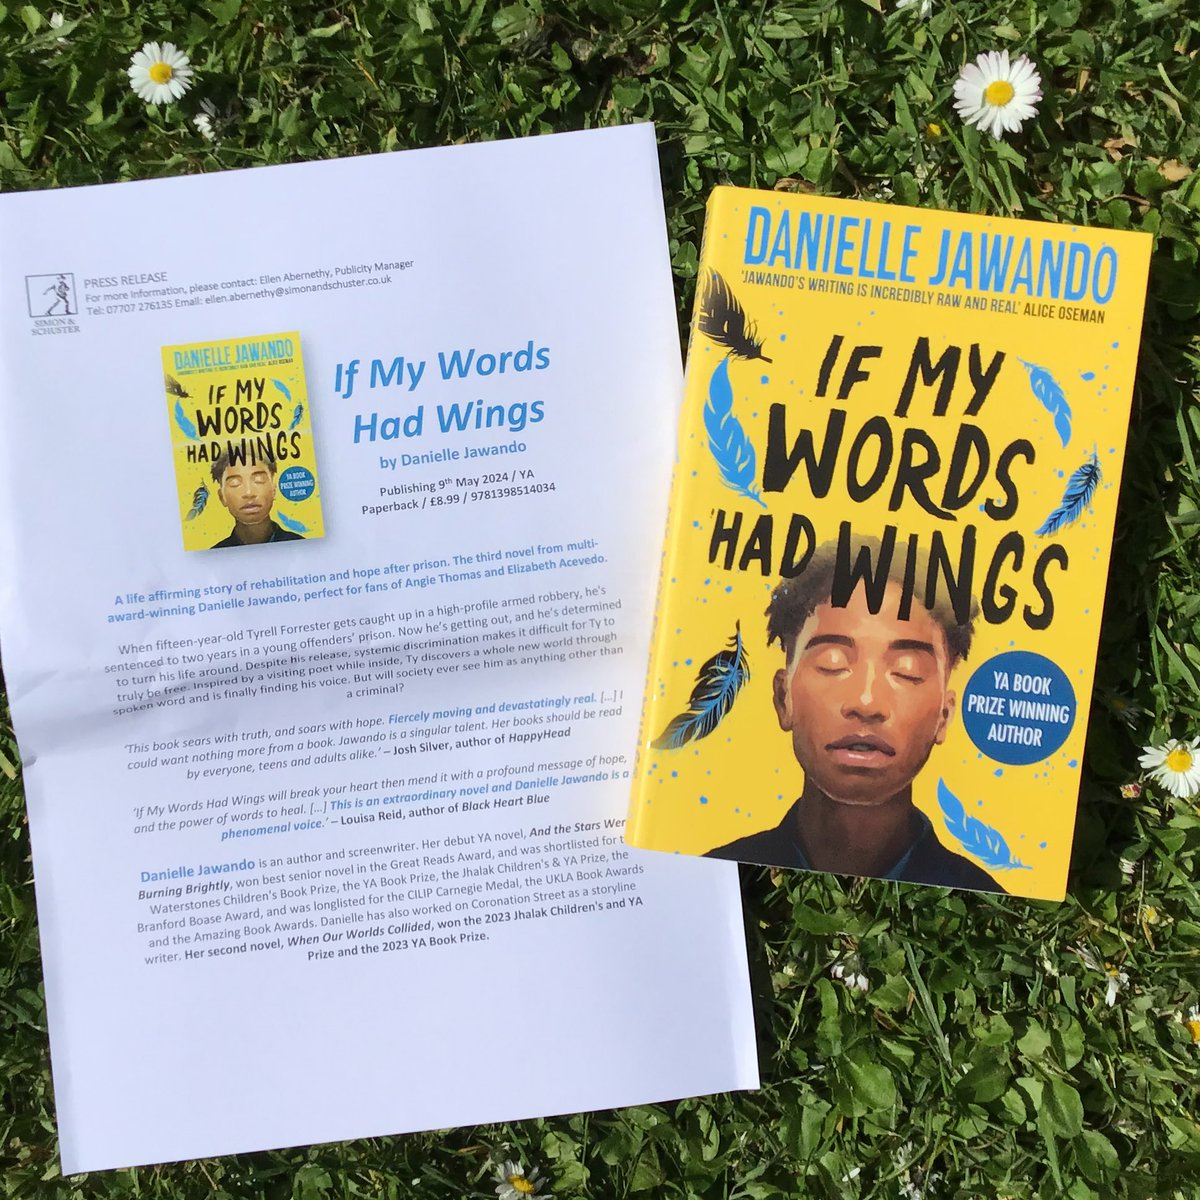 If My Words Had Wings by Danielle Jawando is the #YA story of Tyrell, newly released from prison and wondering if society will ever see him as other than a criminal. Huge thanks to @ellen_abernethy @simonYAbooks. Out 09/05